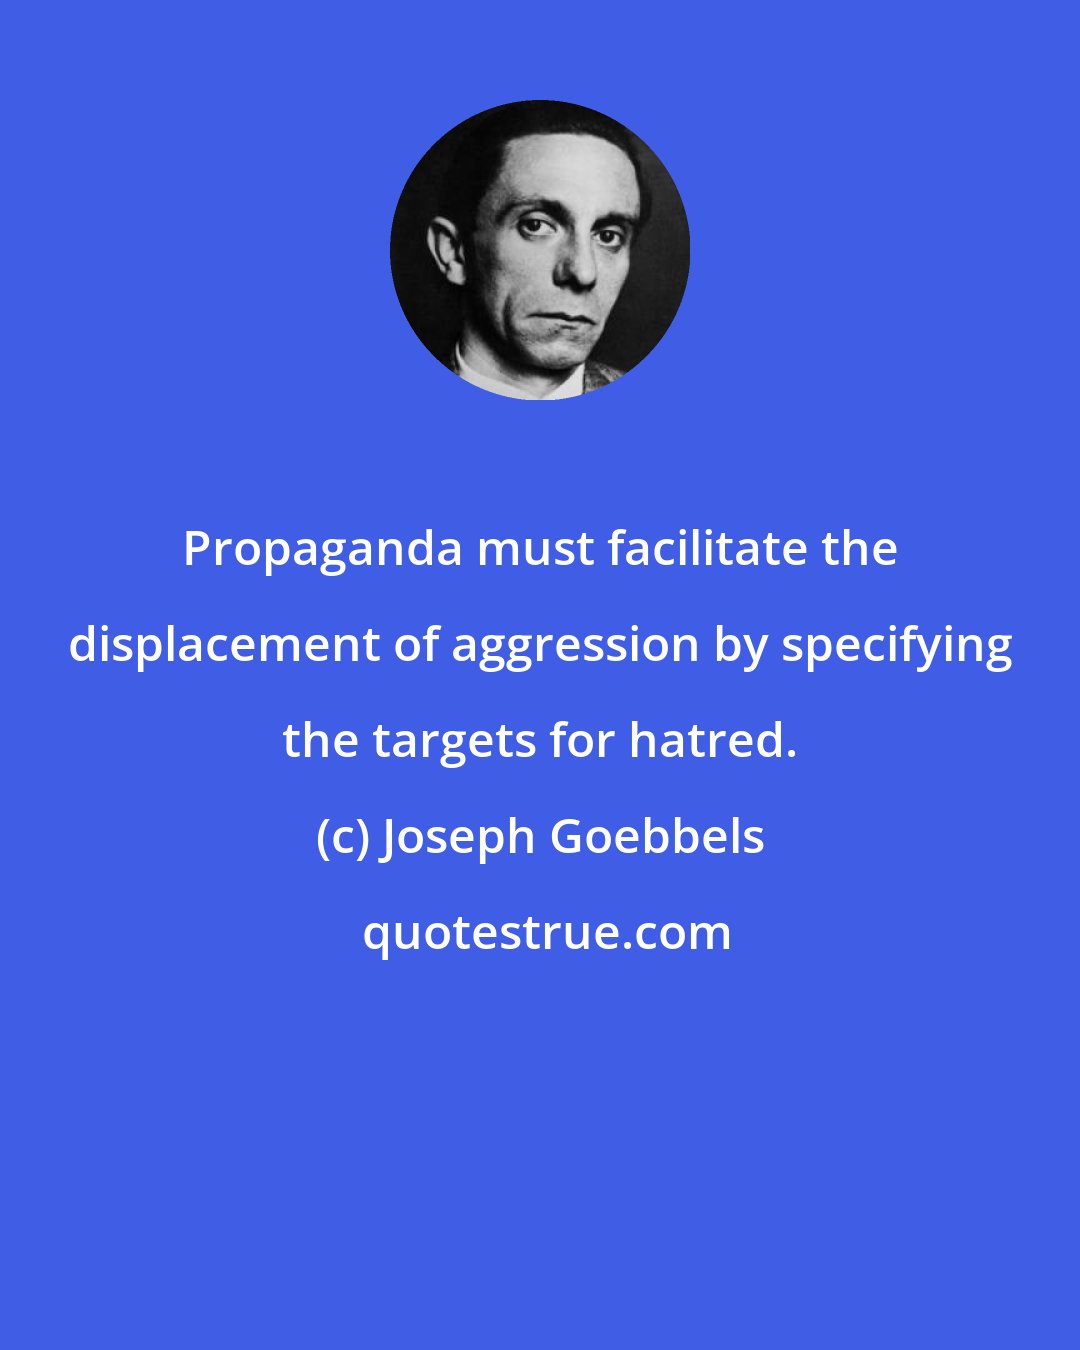 Joseph Goebbels: Propaganda must facilitate the displacement of aggression by specifying the targets for hatred.